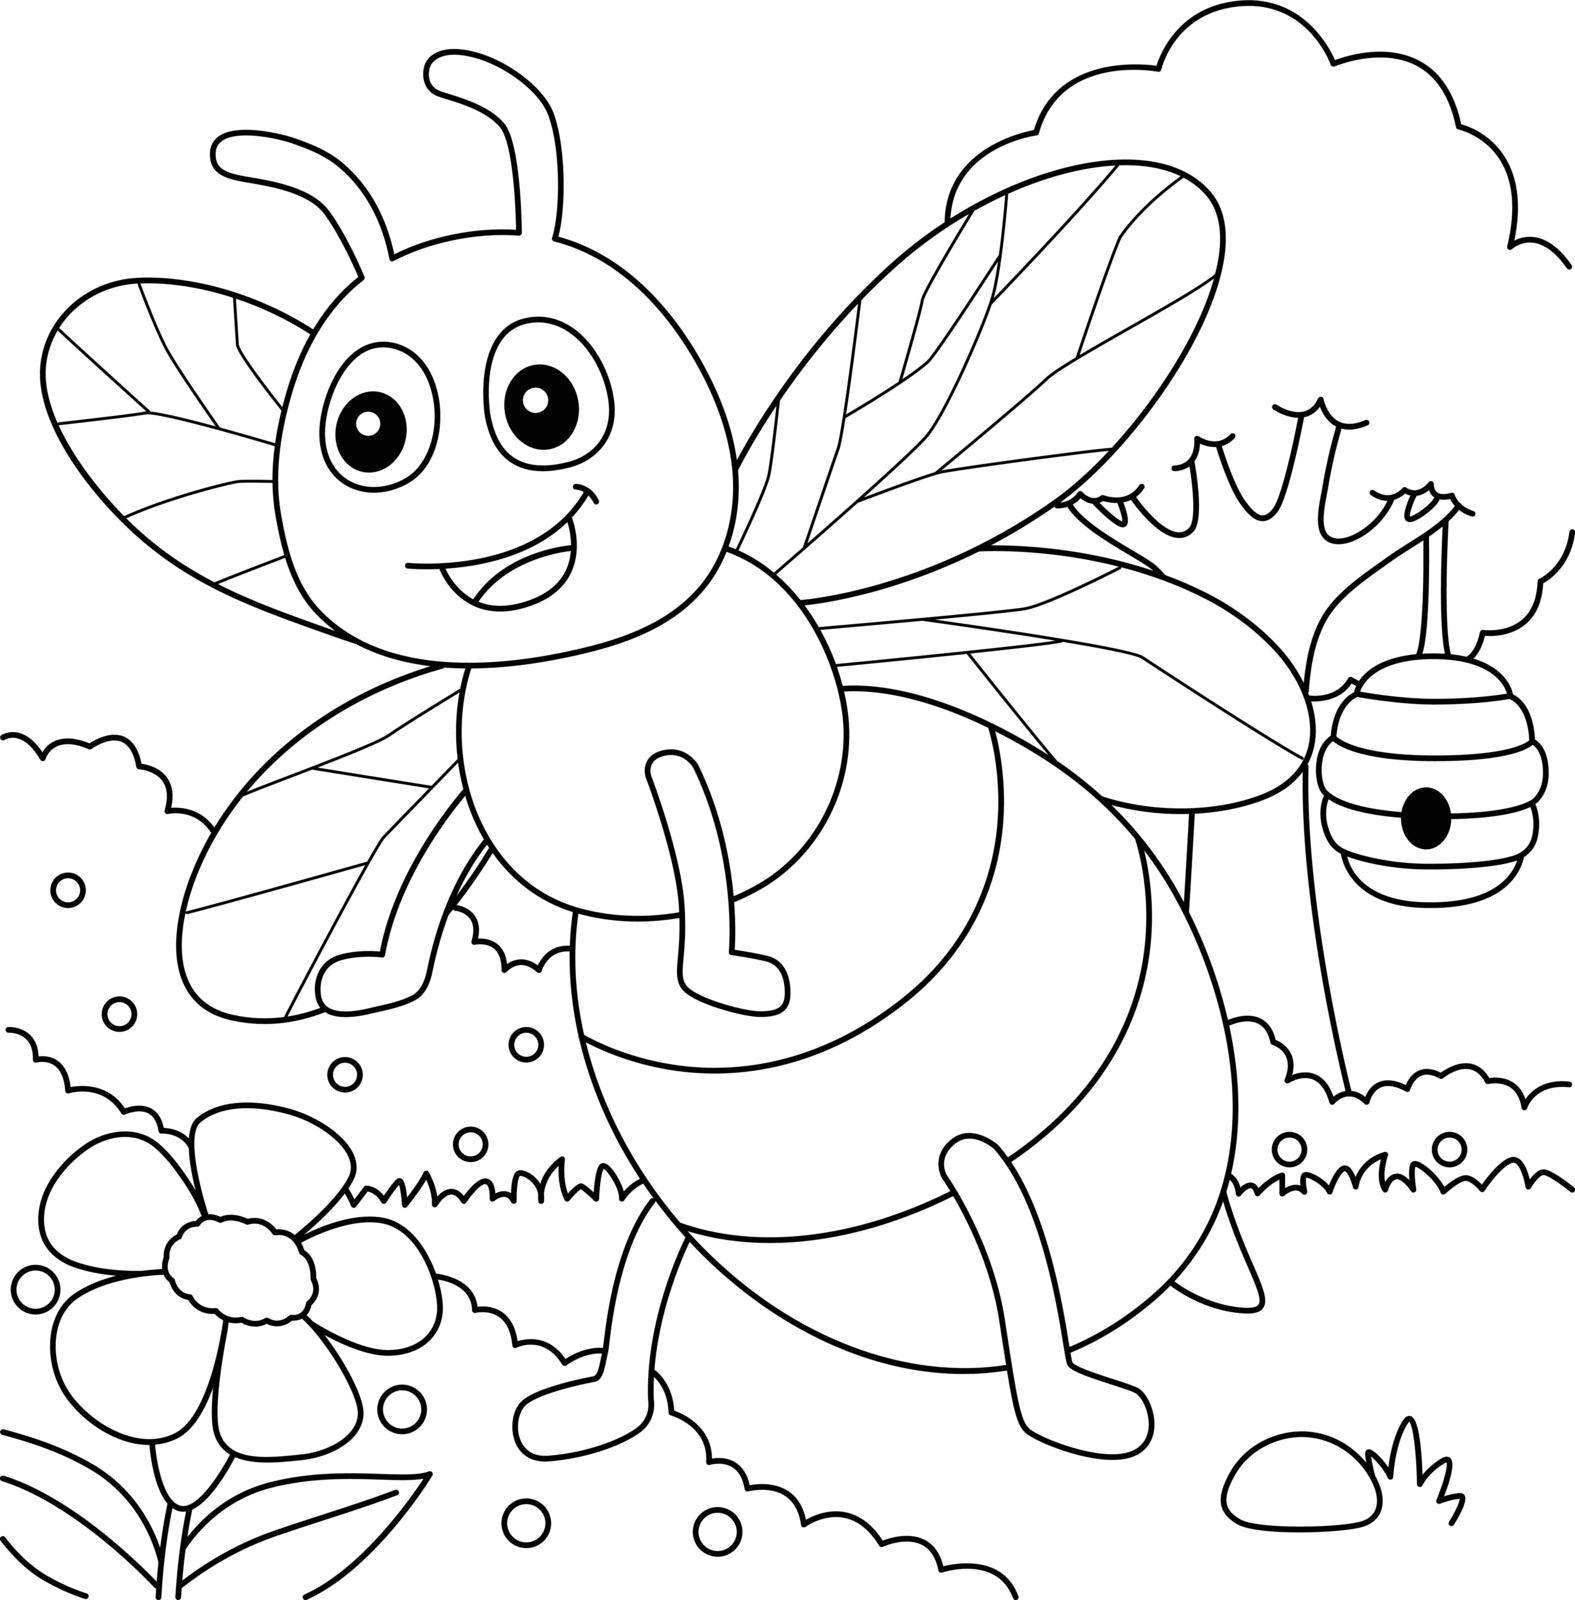 A cute and funny coloring page of a bee farm animal. Provides hours of coloring fun for children. To color, this page is very easy. Suitable for little kids and toddlers.